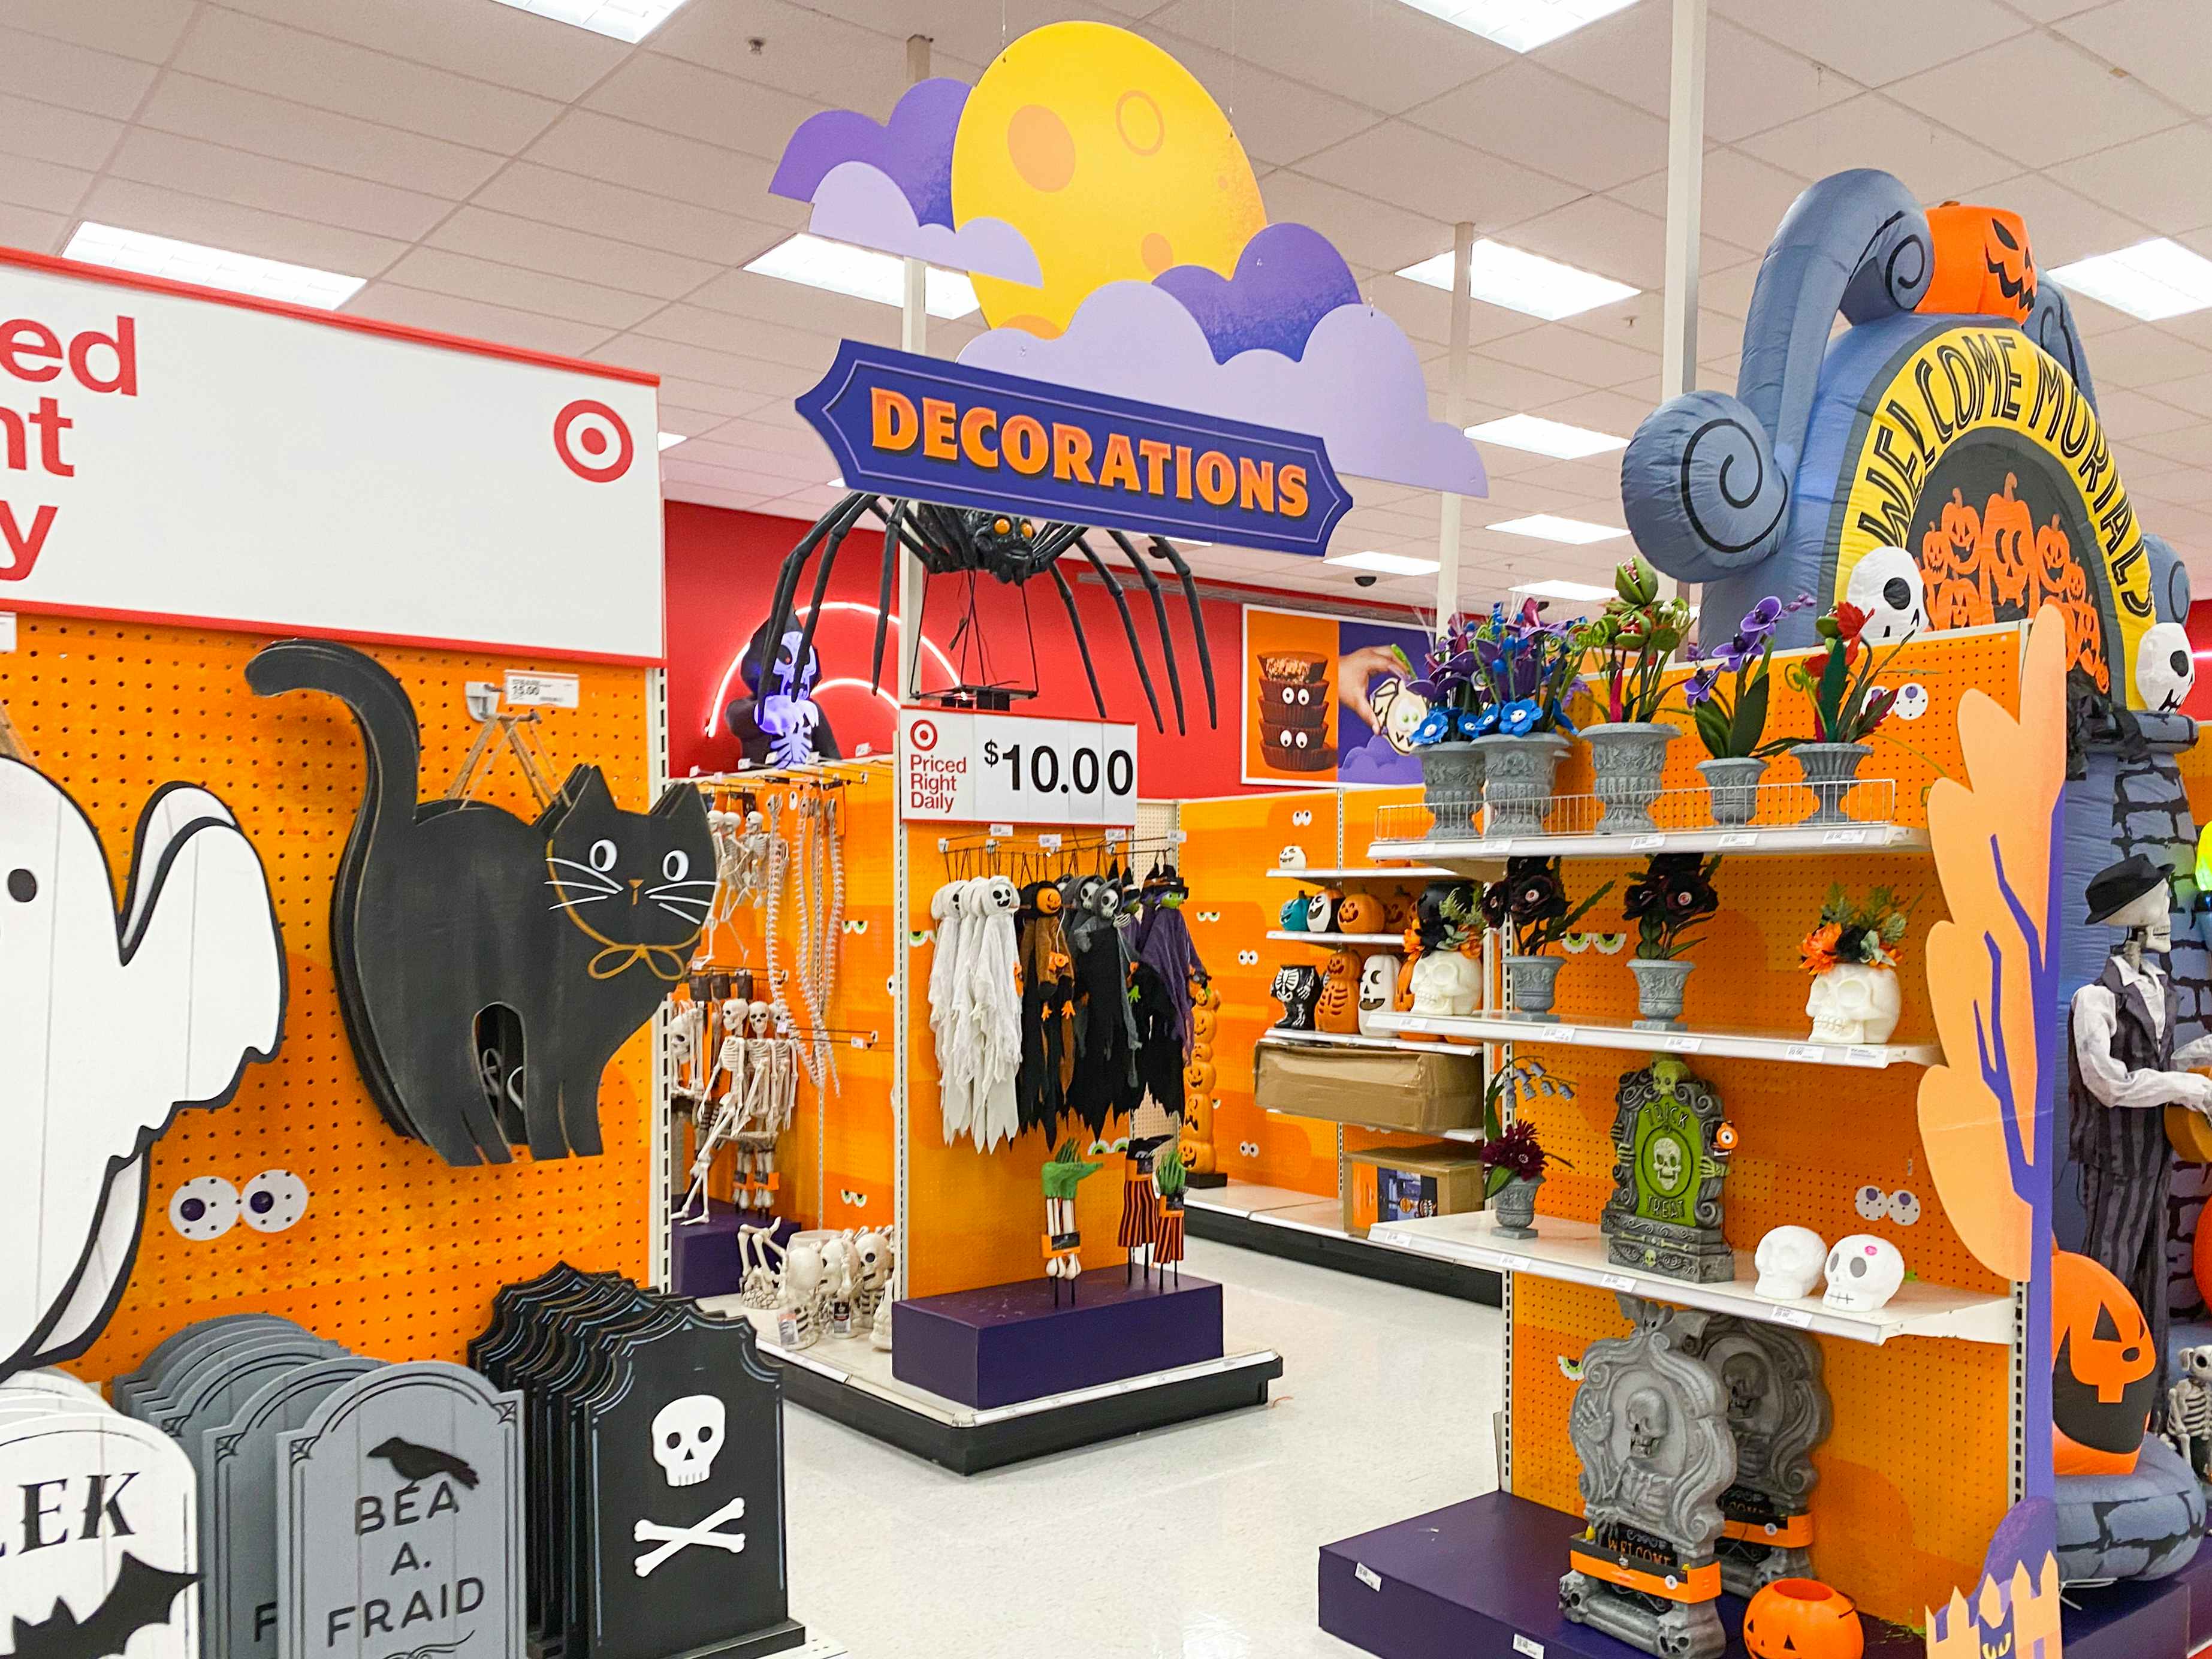 Check Out Last-Minute Halloween Deals at Walmart, Target and More - CNET